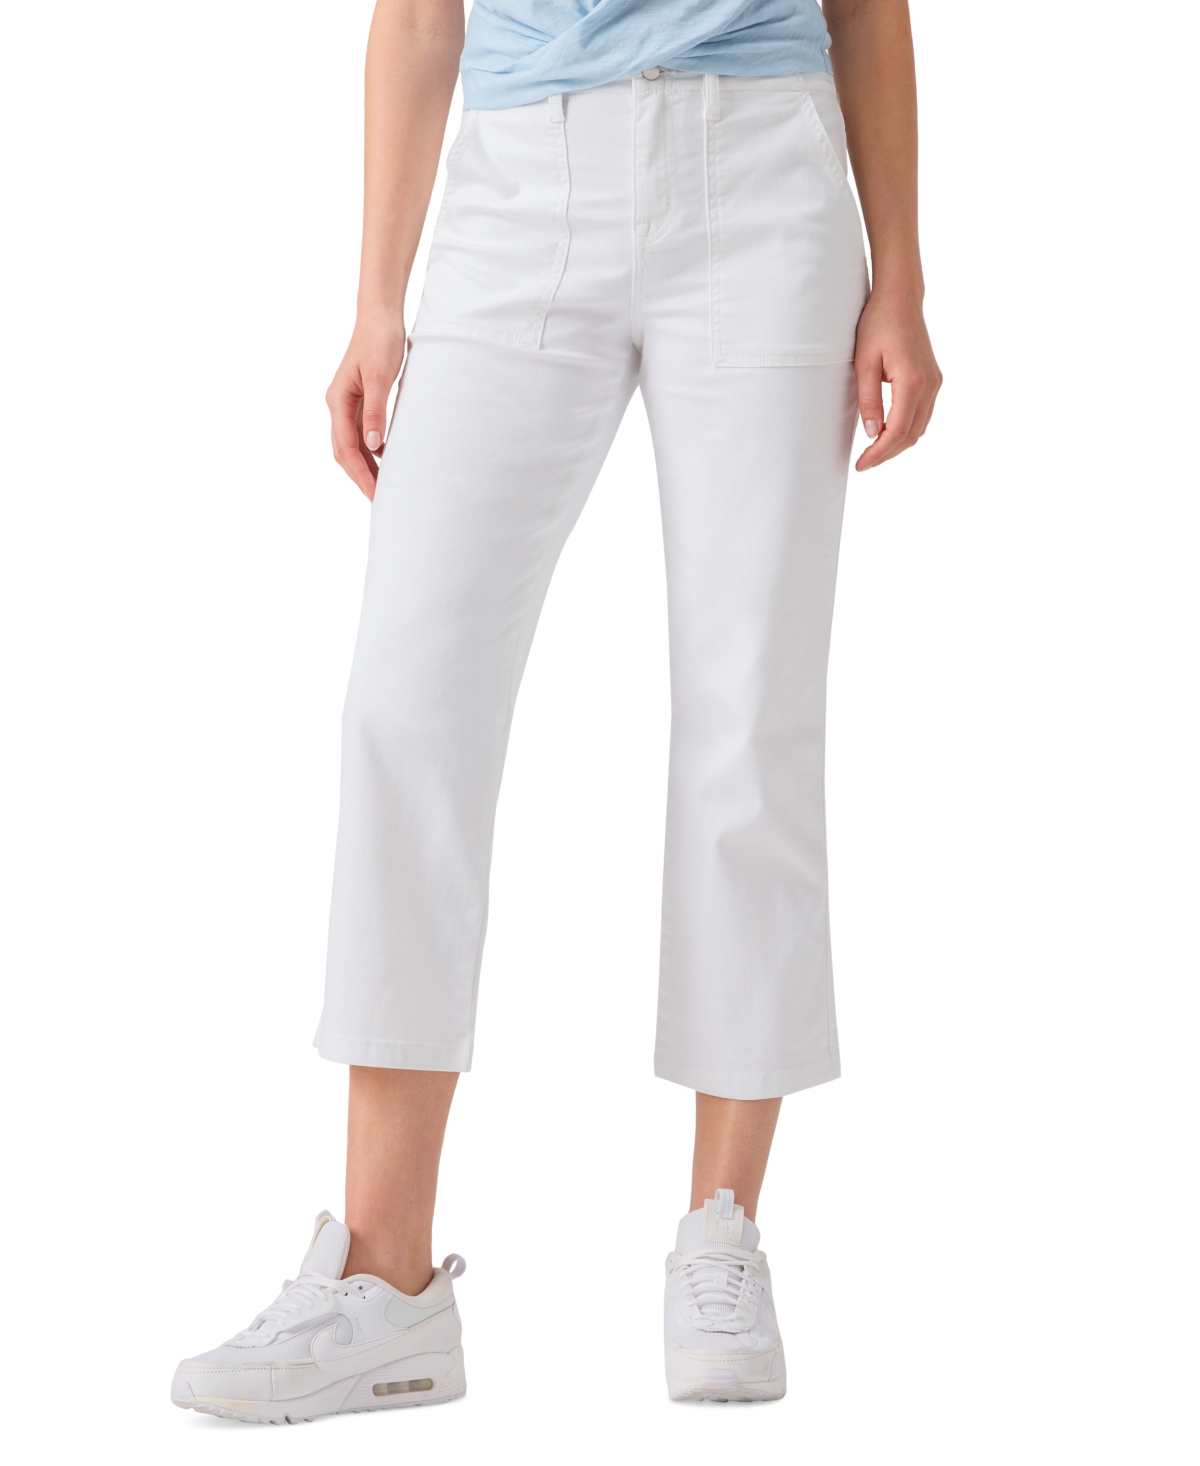 Women's Vacation Cropped Straight Pants - White